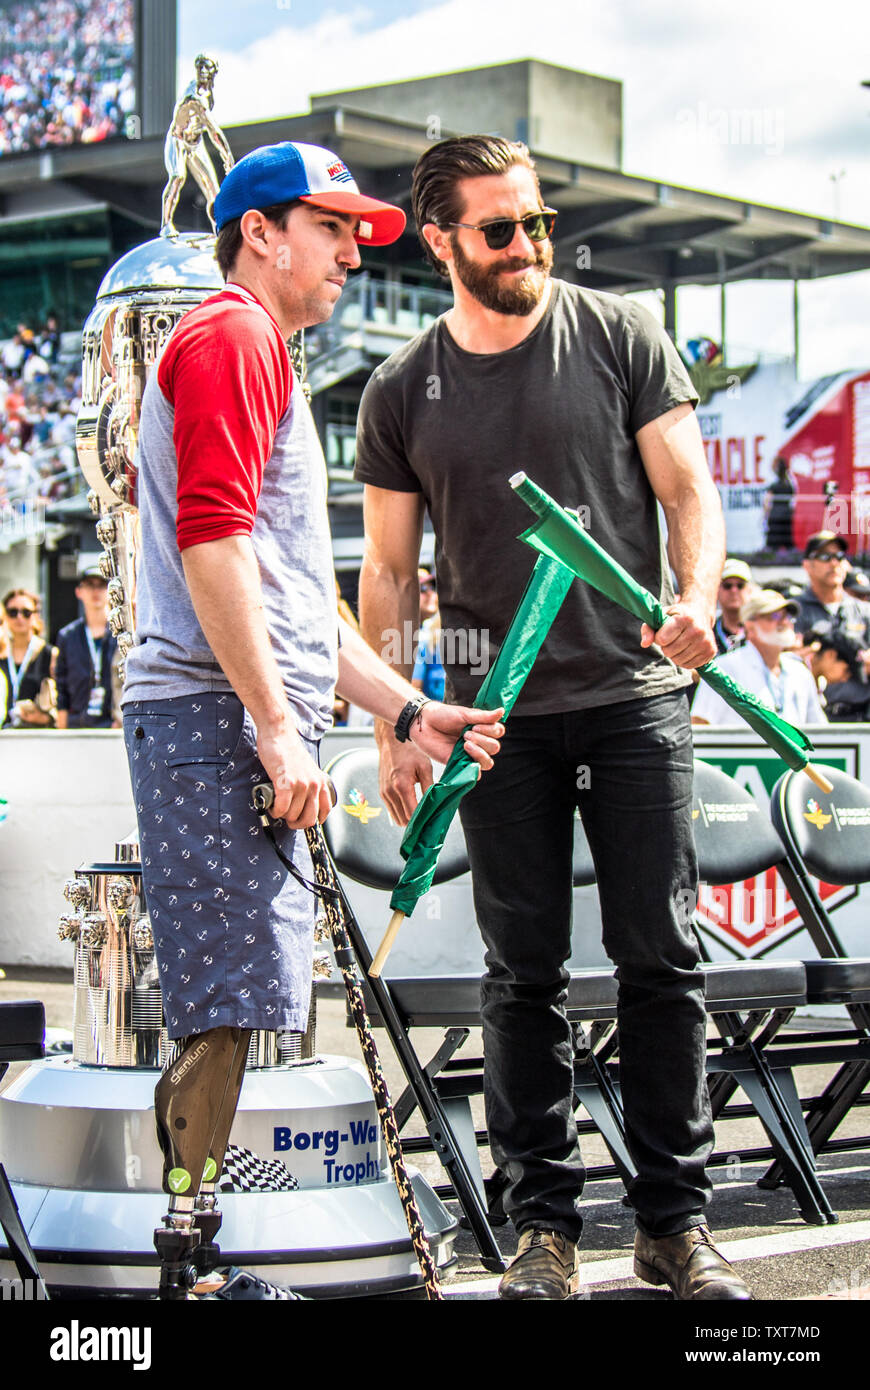 Jeff Bauman (left), who lost both his legs in the Boston Marathon bombing, waved the green flag with actor Jake Gyllenhaal to start the  2017 Indianapolis 500. Gyllenhaal portrays Bauman in the upcoming movie 'Stronger'. At the Indianapolis Motor Speedway on May 28, 2017 in Indianapolis, Indiana. Photo by Edwin Locke/UPI Stock Photo